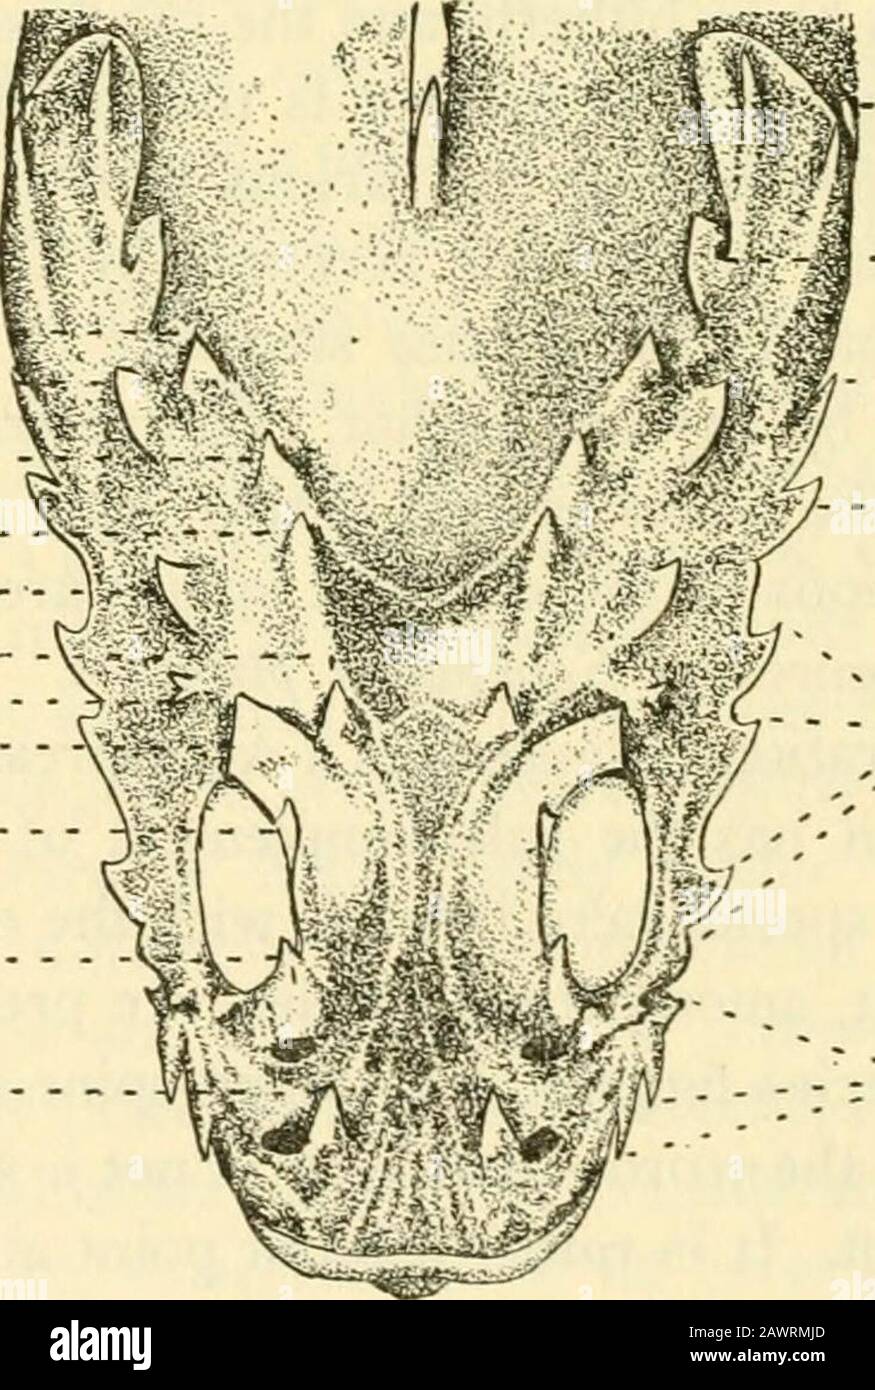 Smithsonian miscellaneous collections . Interior parietal  , esterier parietal.Upper posttemporaS oral ./ Post orbital Cleithral... - -Supplemental preep. First preopercu/ar Second to fifthpreoperculajr Preorbiial Suborbital Fig. I.—Side view of the head of Scorpaena pluviieri showing the spines andtheir nomenclature as used in this paper. Semidiagrammatic. Drawn by MildredH. Carrington. Up&rcul^r.- Upper posttempor&L . 1| -i LLower posttemporaL Post&yior p^rieta.1. Anterior parieta.L Pt&rotic. ... ... ?L Frontal-^ V ^ Sphenotic. ....... - .- .^ rostocula.r. Oupraocu/ar- .rrec7cu/&lt;ar. . -. Stock Photo